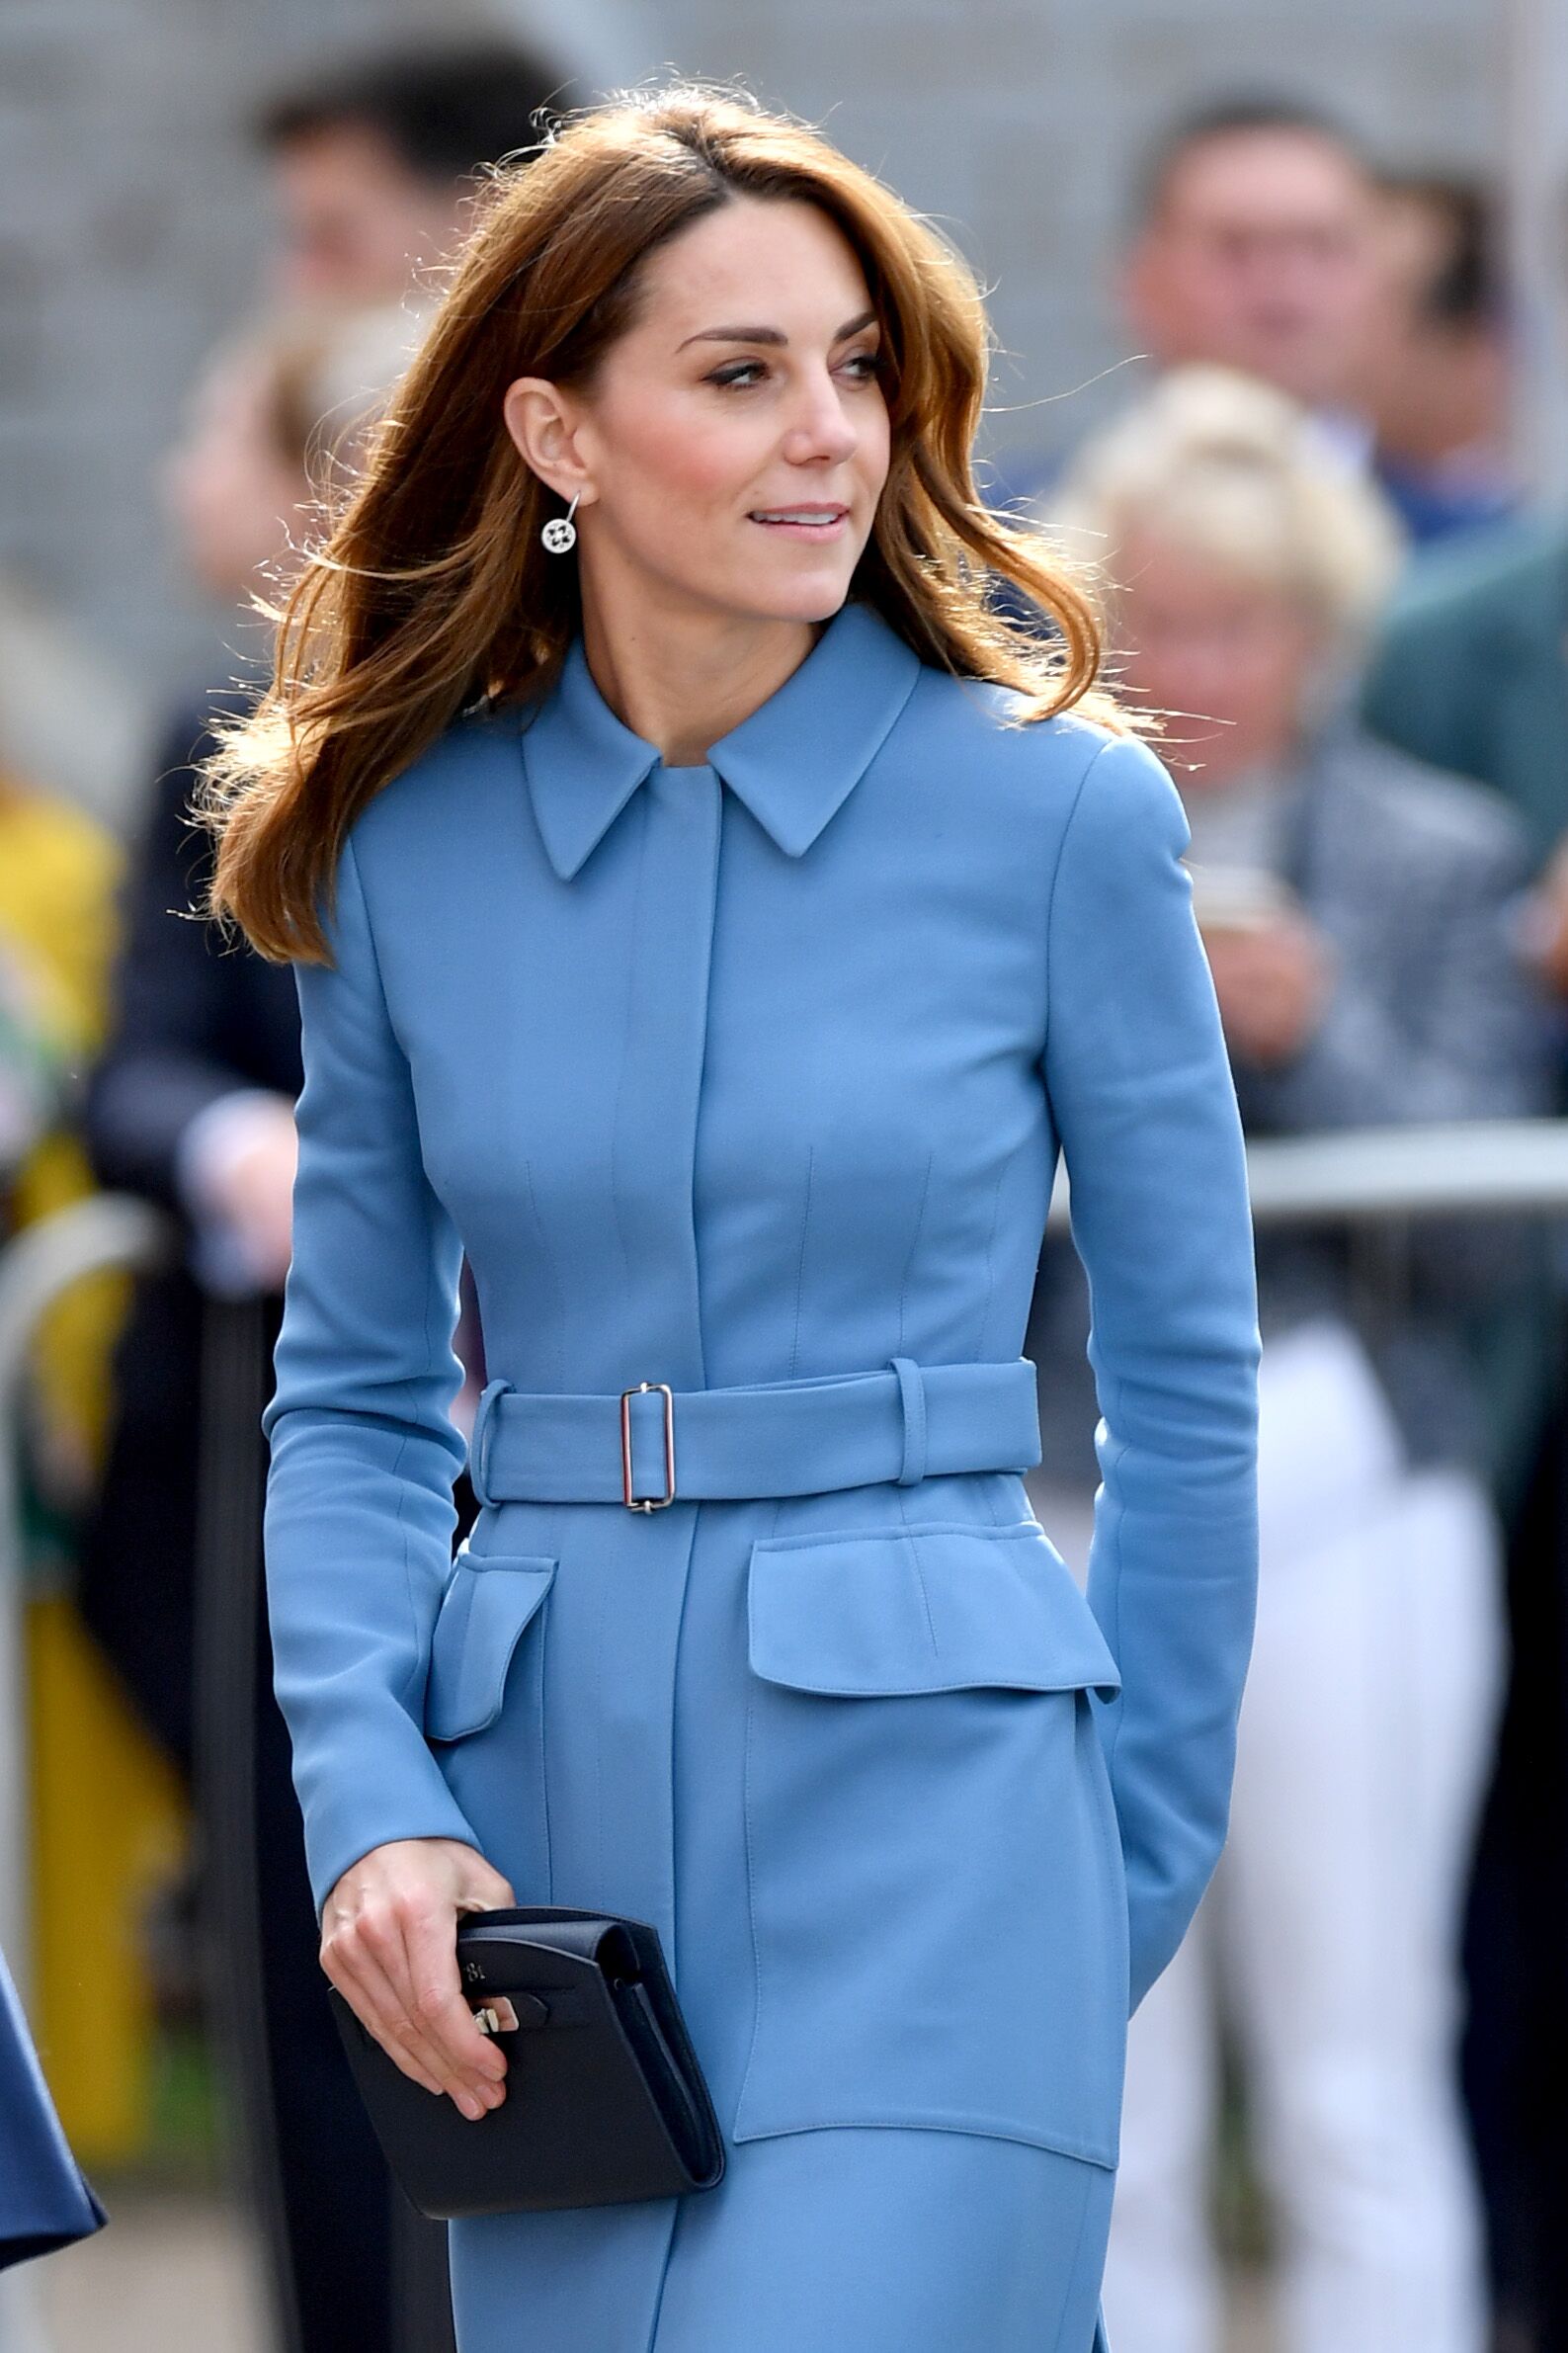 Kate Middleton attends the naming ceremony for The RSS Sir David Attenborough. | Source: Getty Images